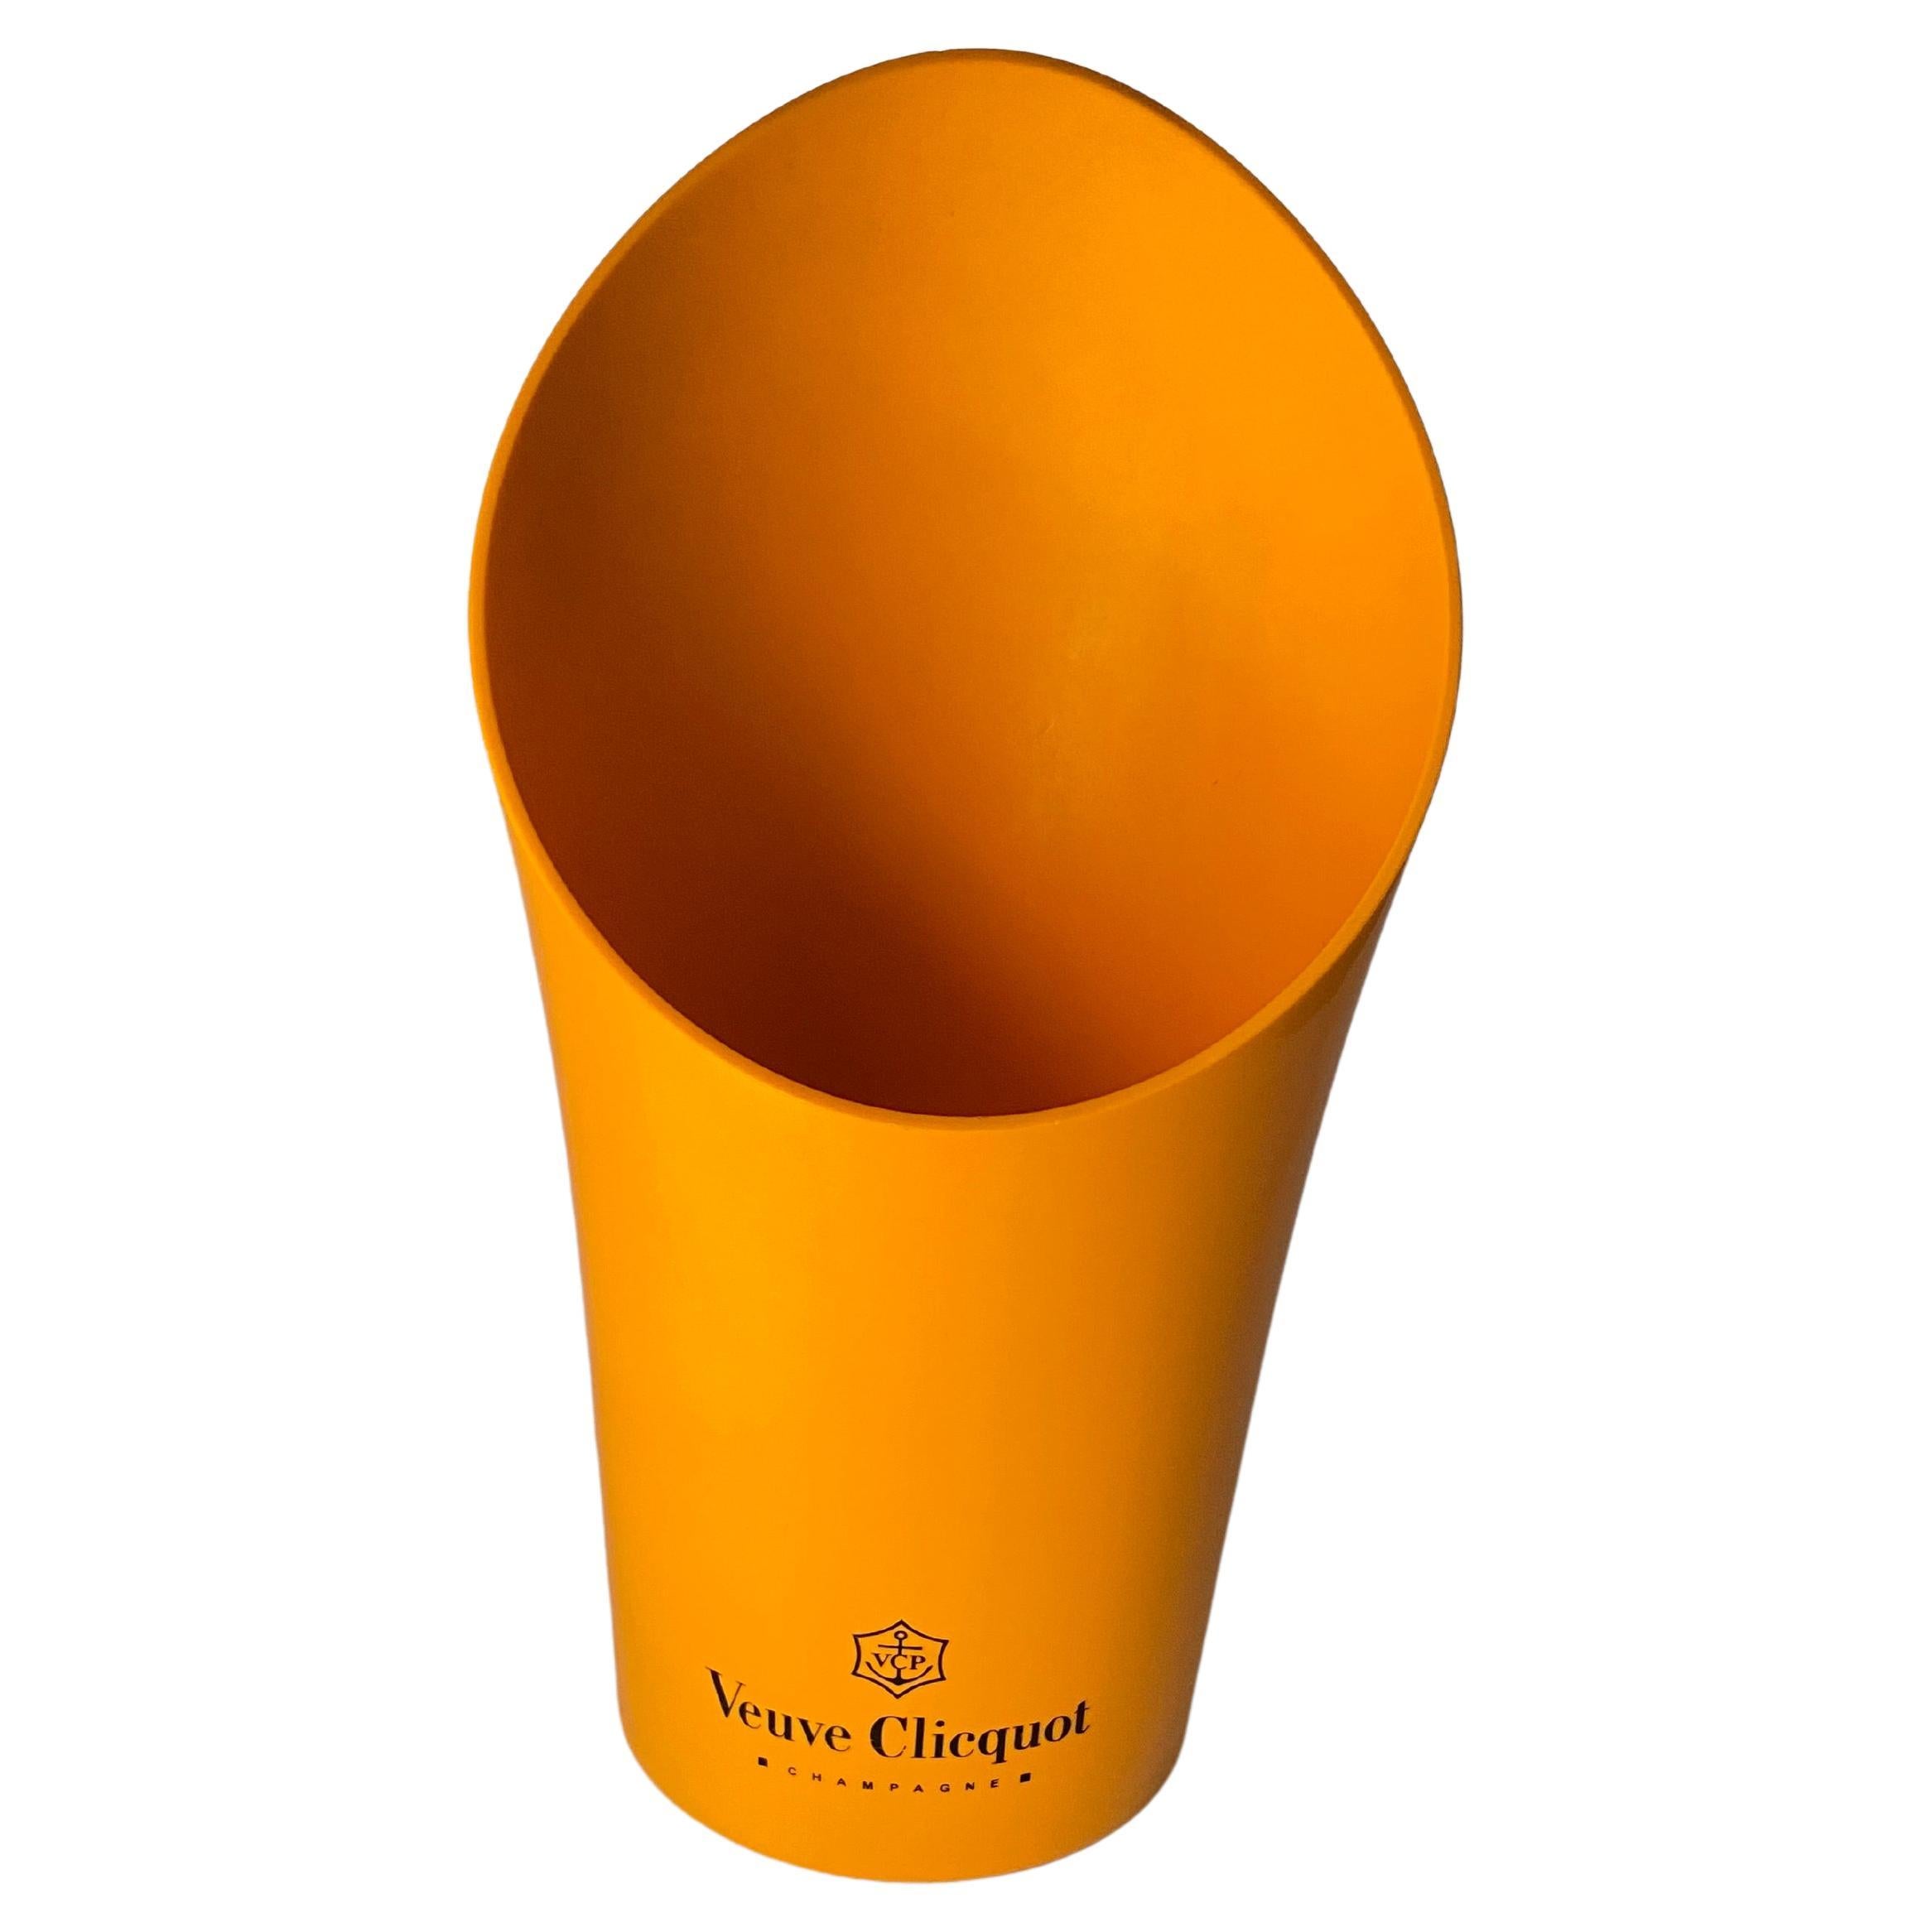 Champagne bucket with an Orange Color.
Ice bucket.
In Plastic, by Veuve Cliquot Champagne.
Made during the 20th Century.